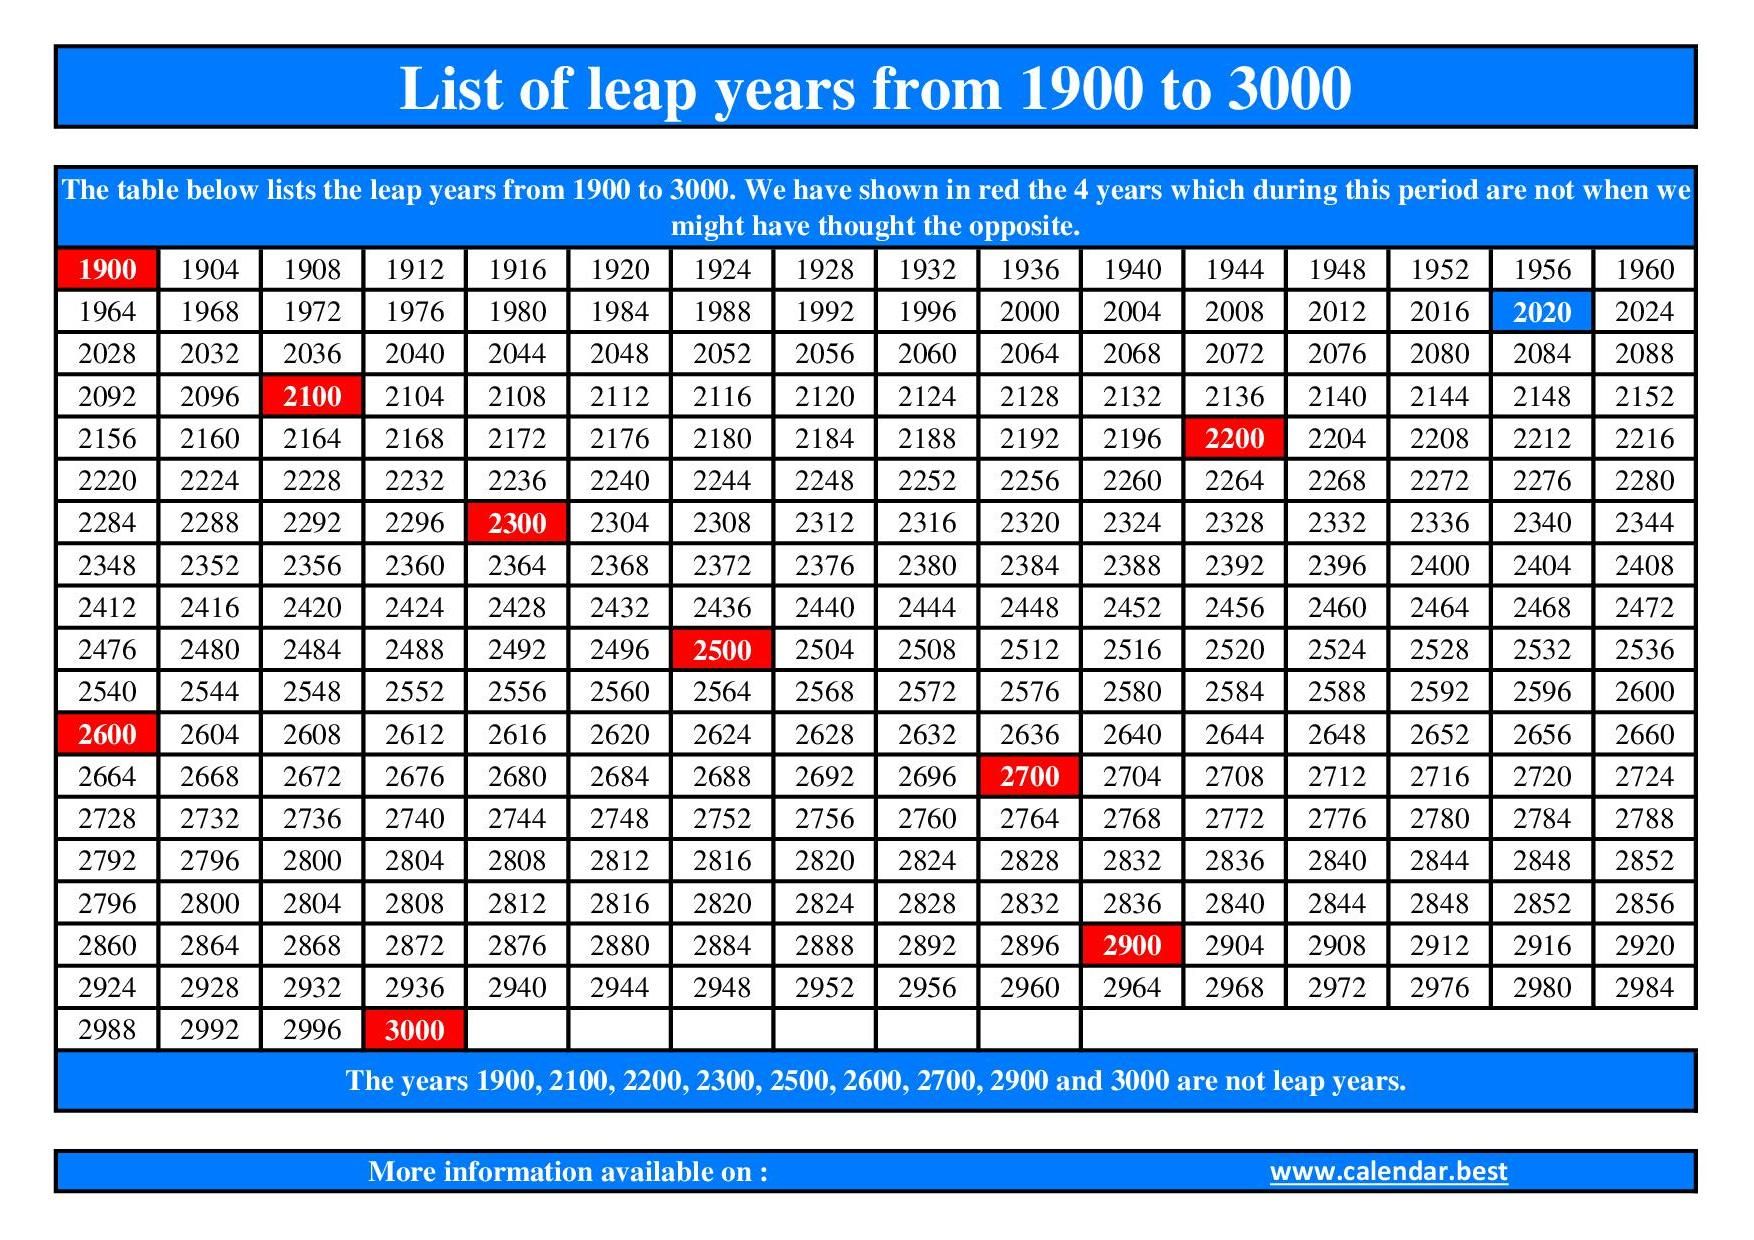 The Ultimate List of Leap Years in the 19th Century